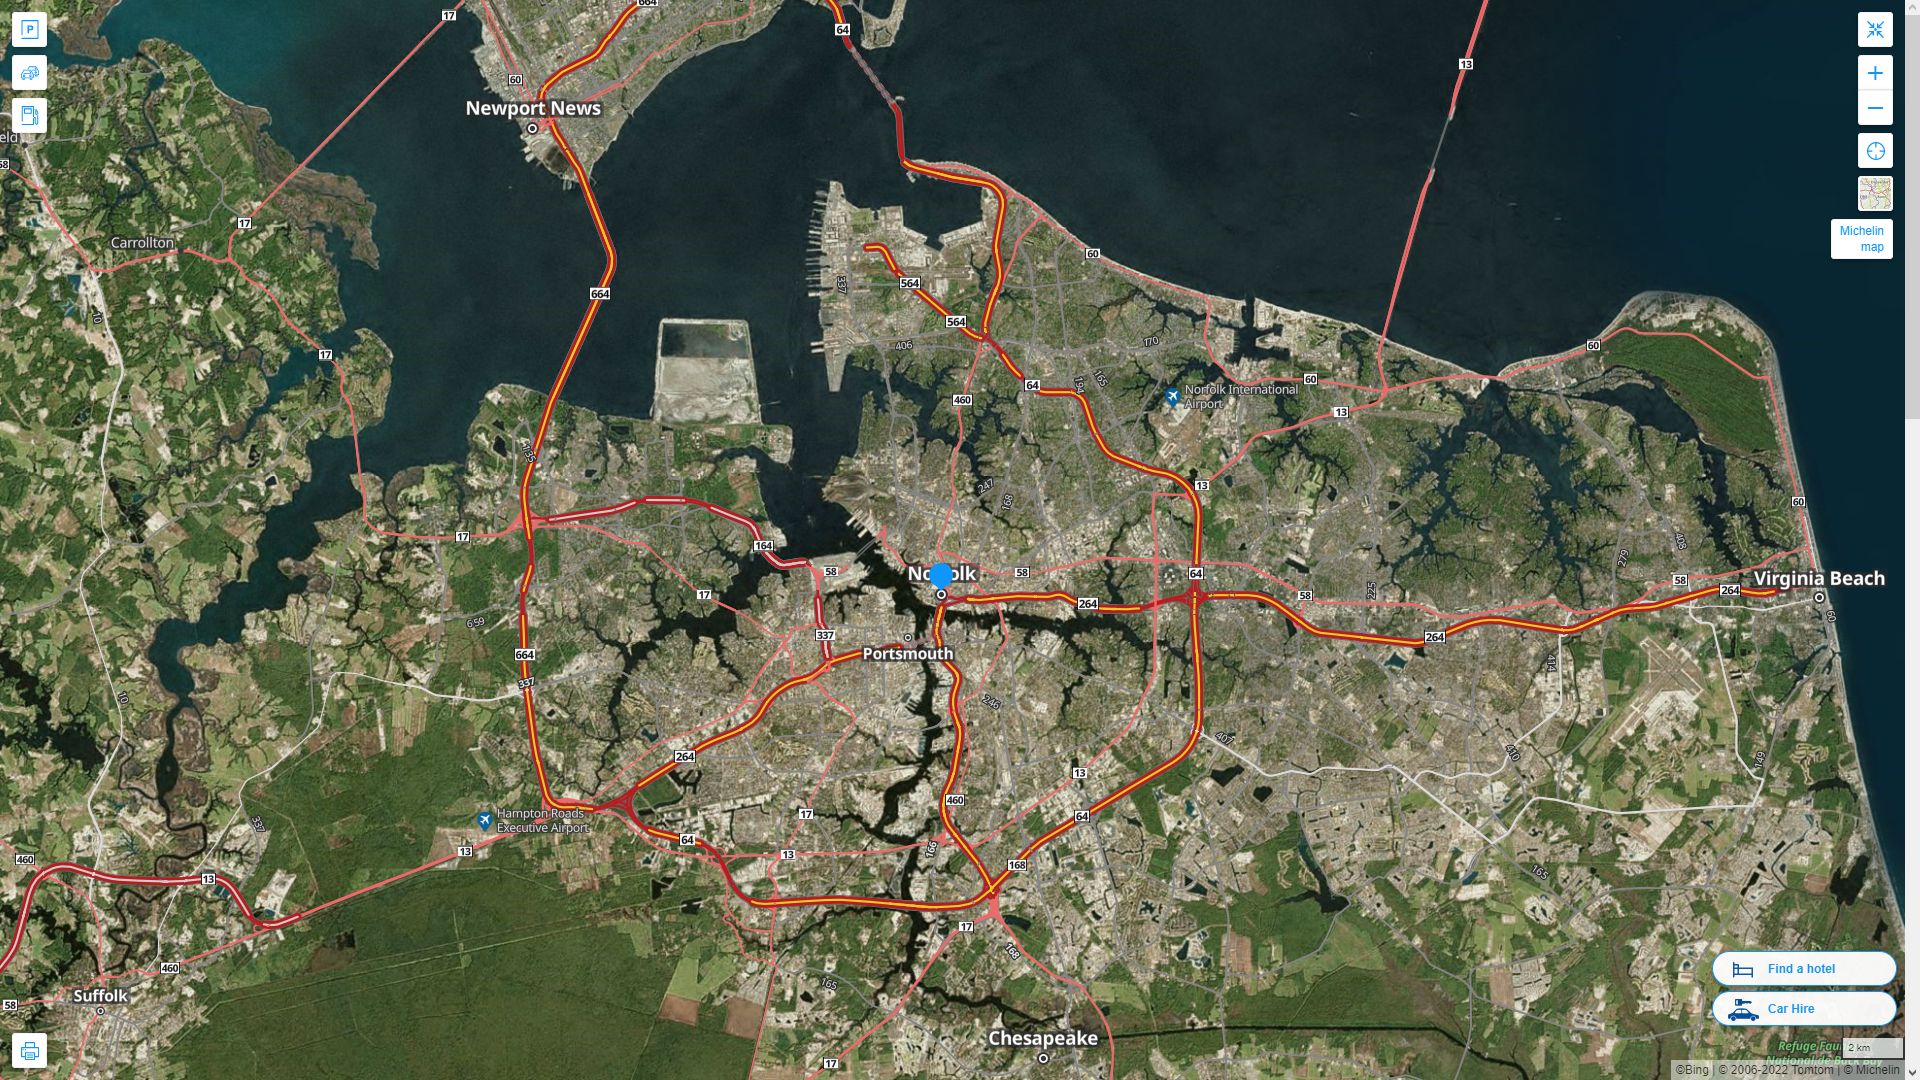 Norfolk Virginia Highway and Road Map with Satellite View